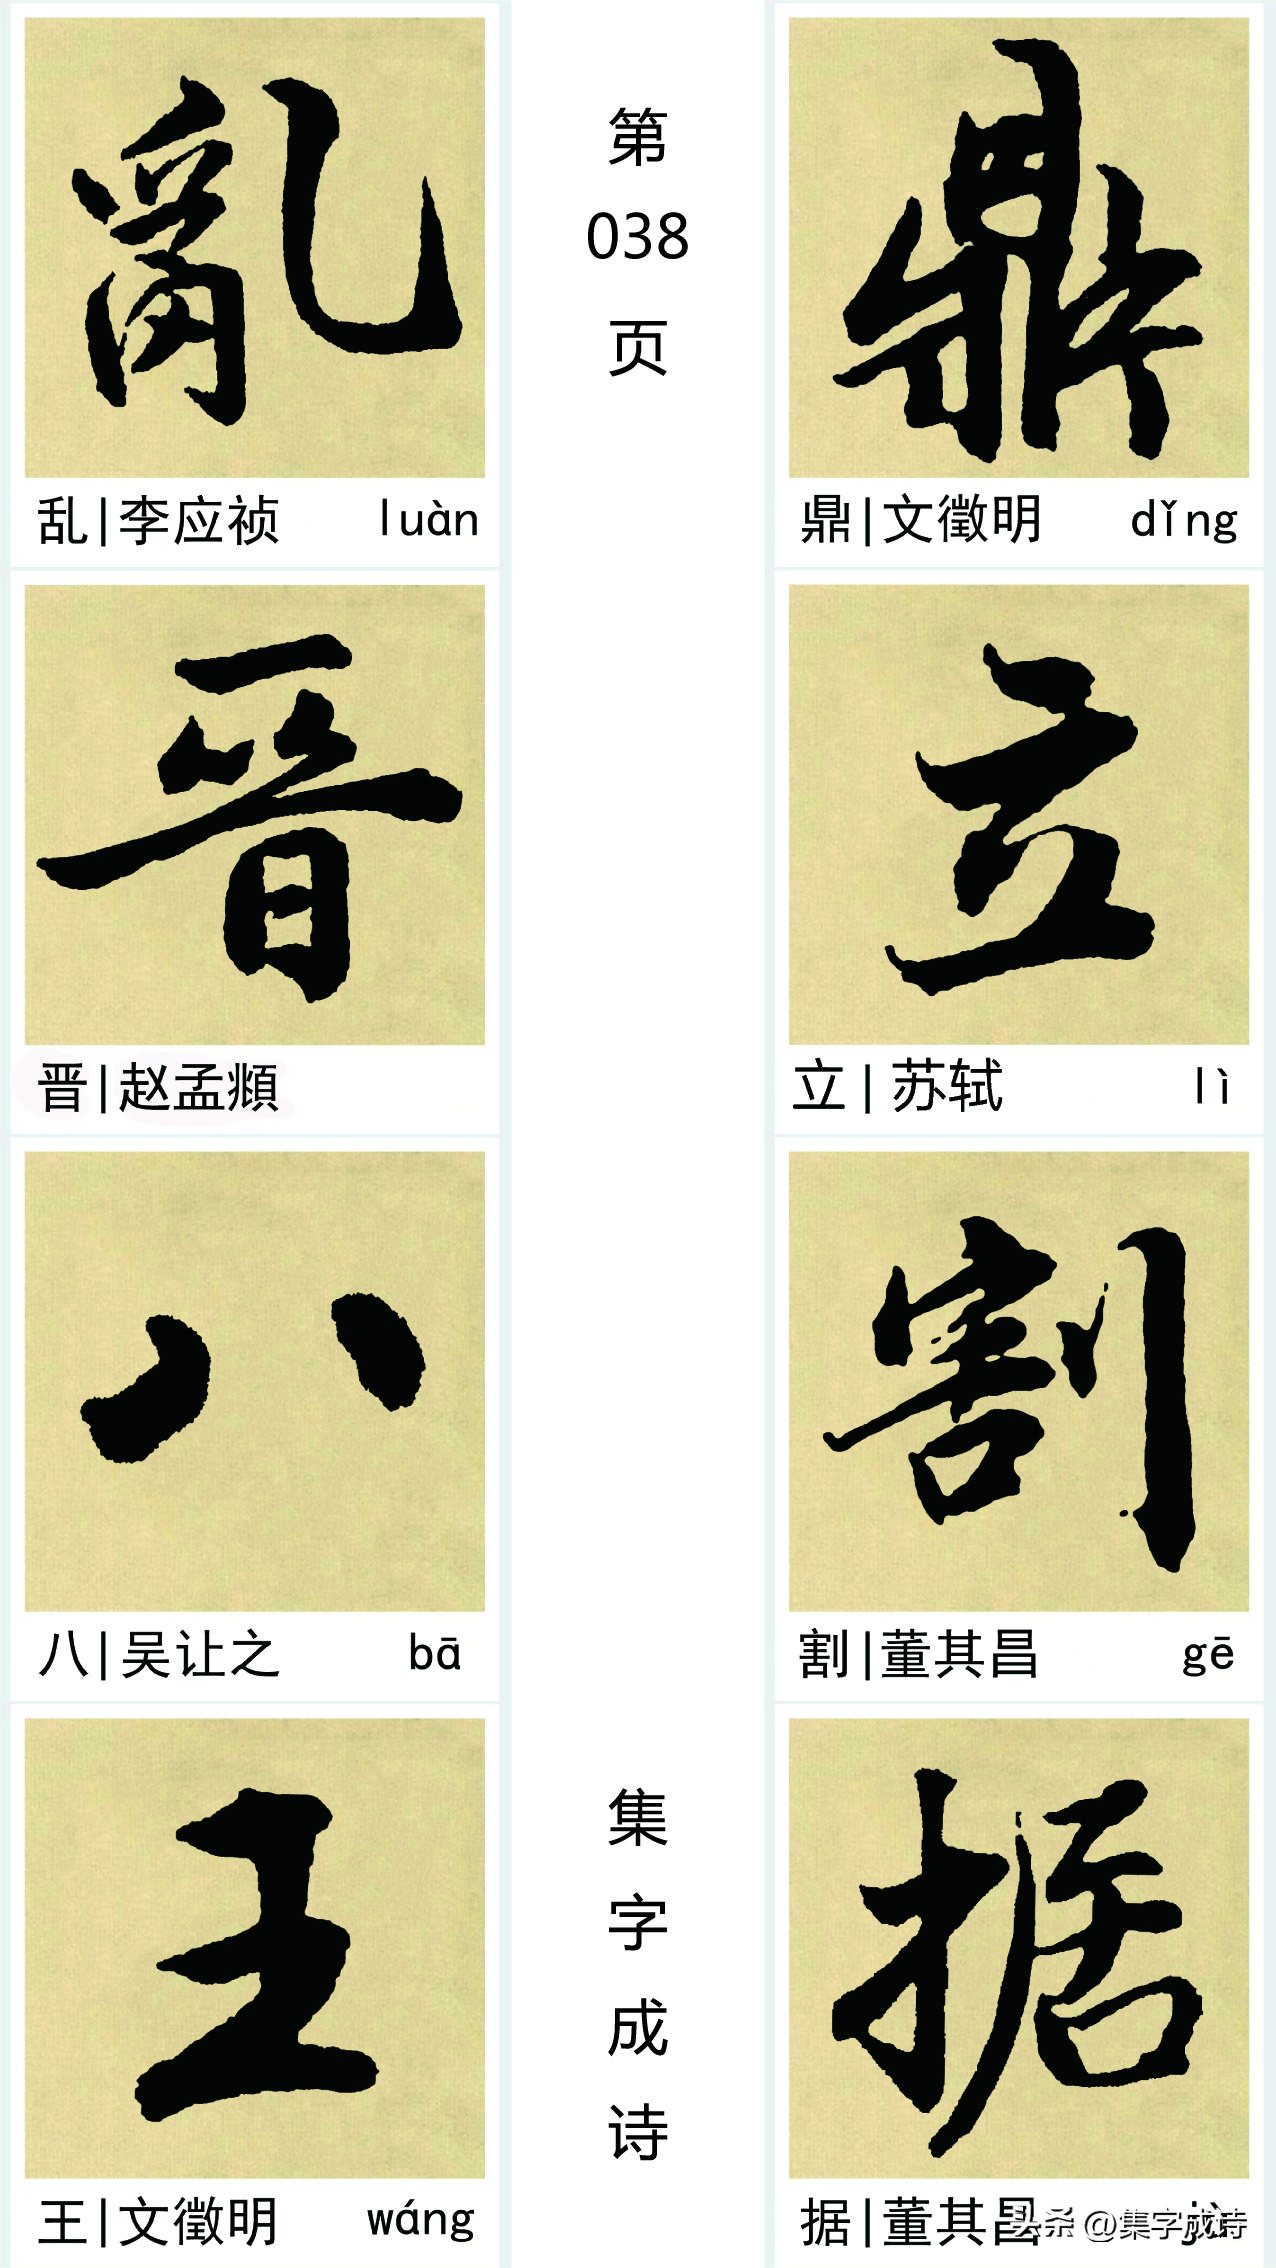 The phonetic version of "The Classic of Chinese Characters" debuts: Appreciation of Multi-body Calligraphy Collection, pages 37-45